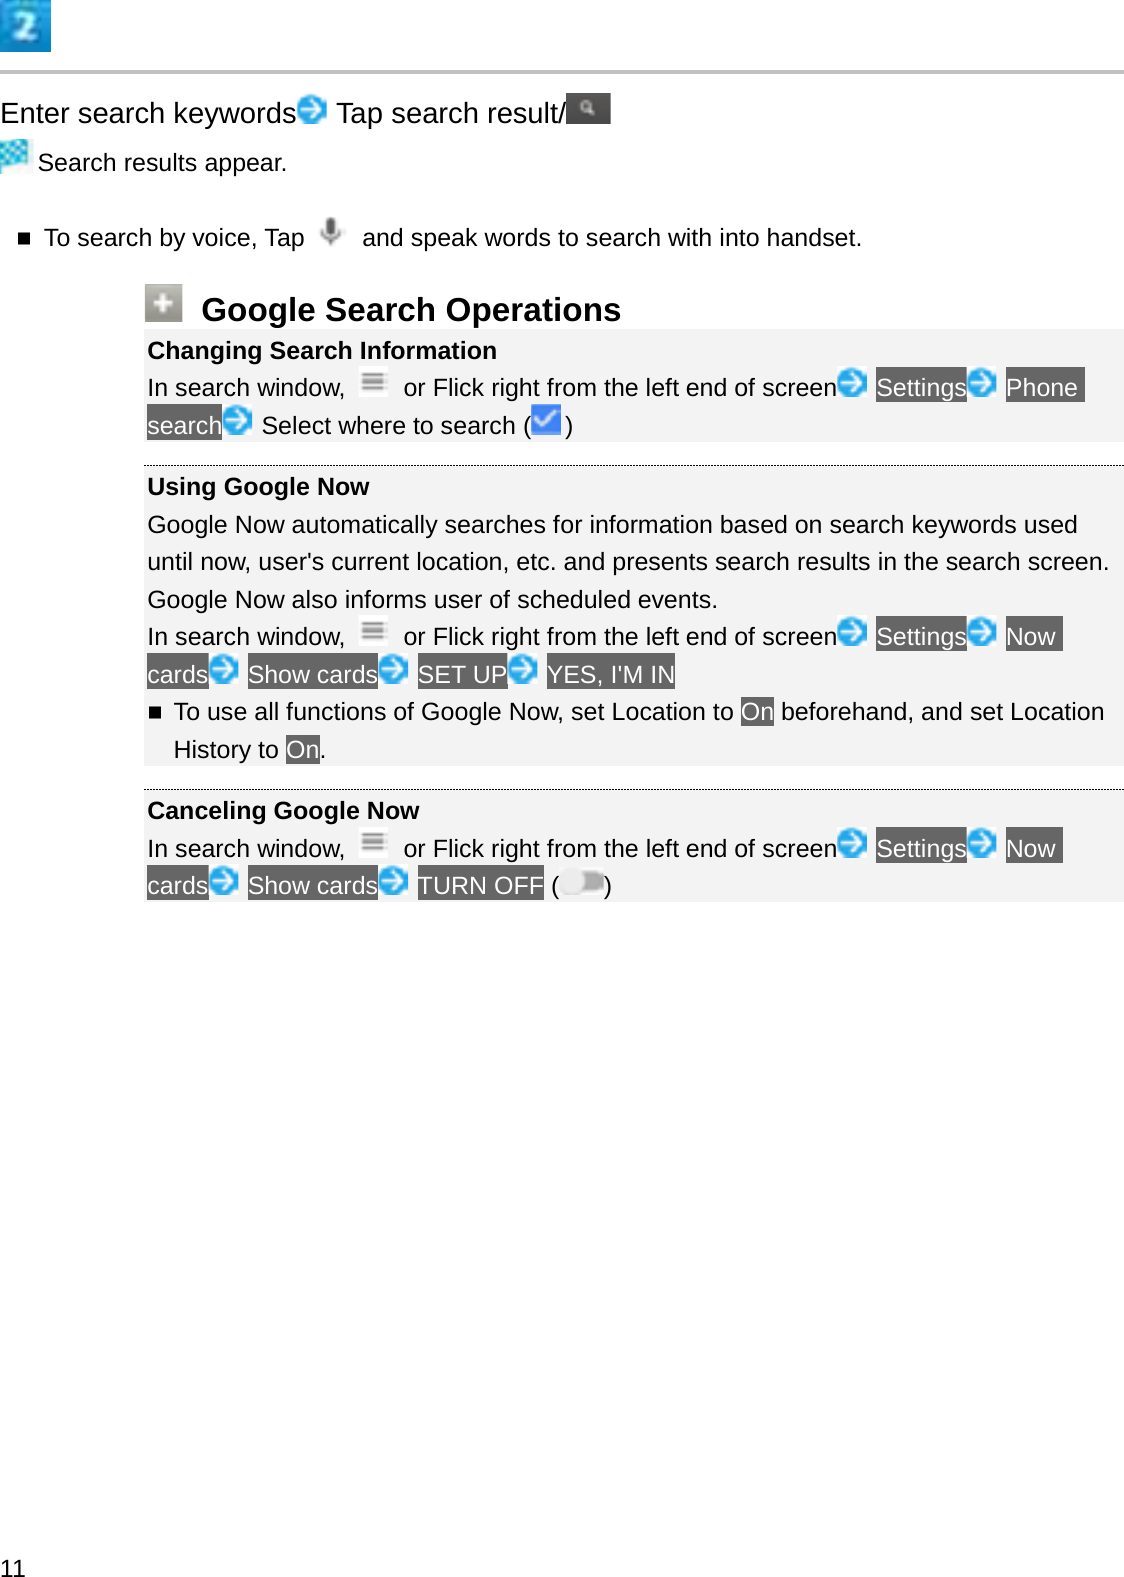 Enter search keywords Tap search result/Search results appear.To search by voice, Tap  and speak words to search with into handset.Google Search OperationsChanging Search InformationIn search window,  or Flick right from the left end of screen Settings Phone search Select where to search ( )Using Google NowGoogle Now automatically searches for information based on search keywords used until now, user&apos;s current location, etc. and presents search results in the search screen. Google Now also informs user of scheduled events.In search window,  or Flick right from the left end of screen Settings Now cards Show cards SET UP YES, I&apos;M INTo use all functions of Google Now, set Location to On beforehand, and set Location History to On.Canceling Google NowIn search window,  or Flick right from the left end of screen Settings Now cards Show cards TURN OFF ( )11